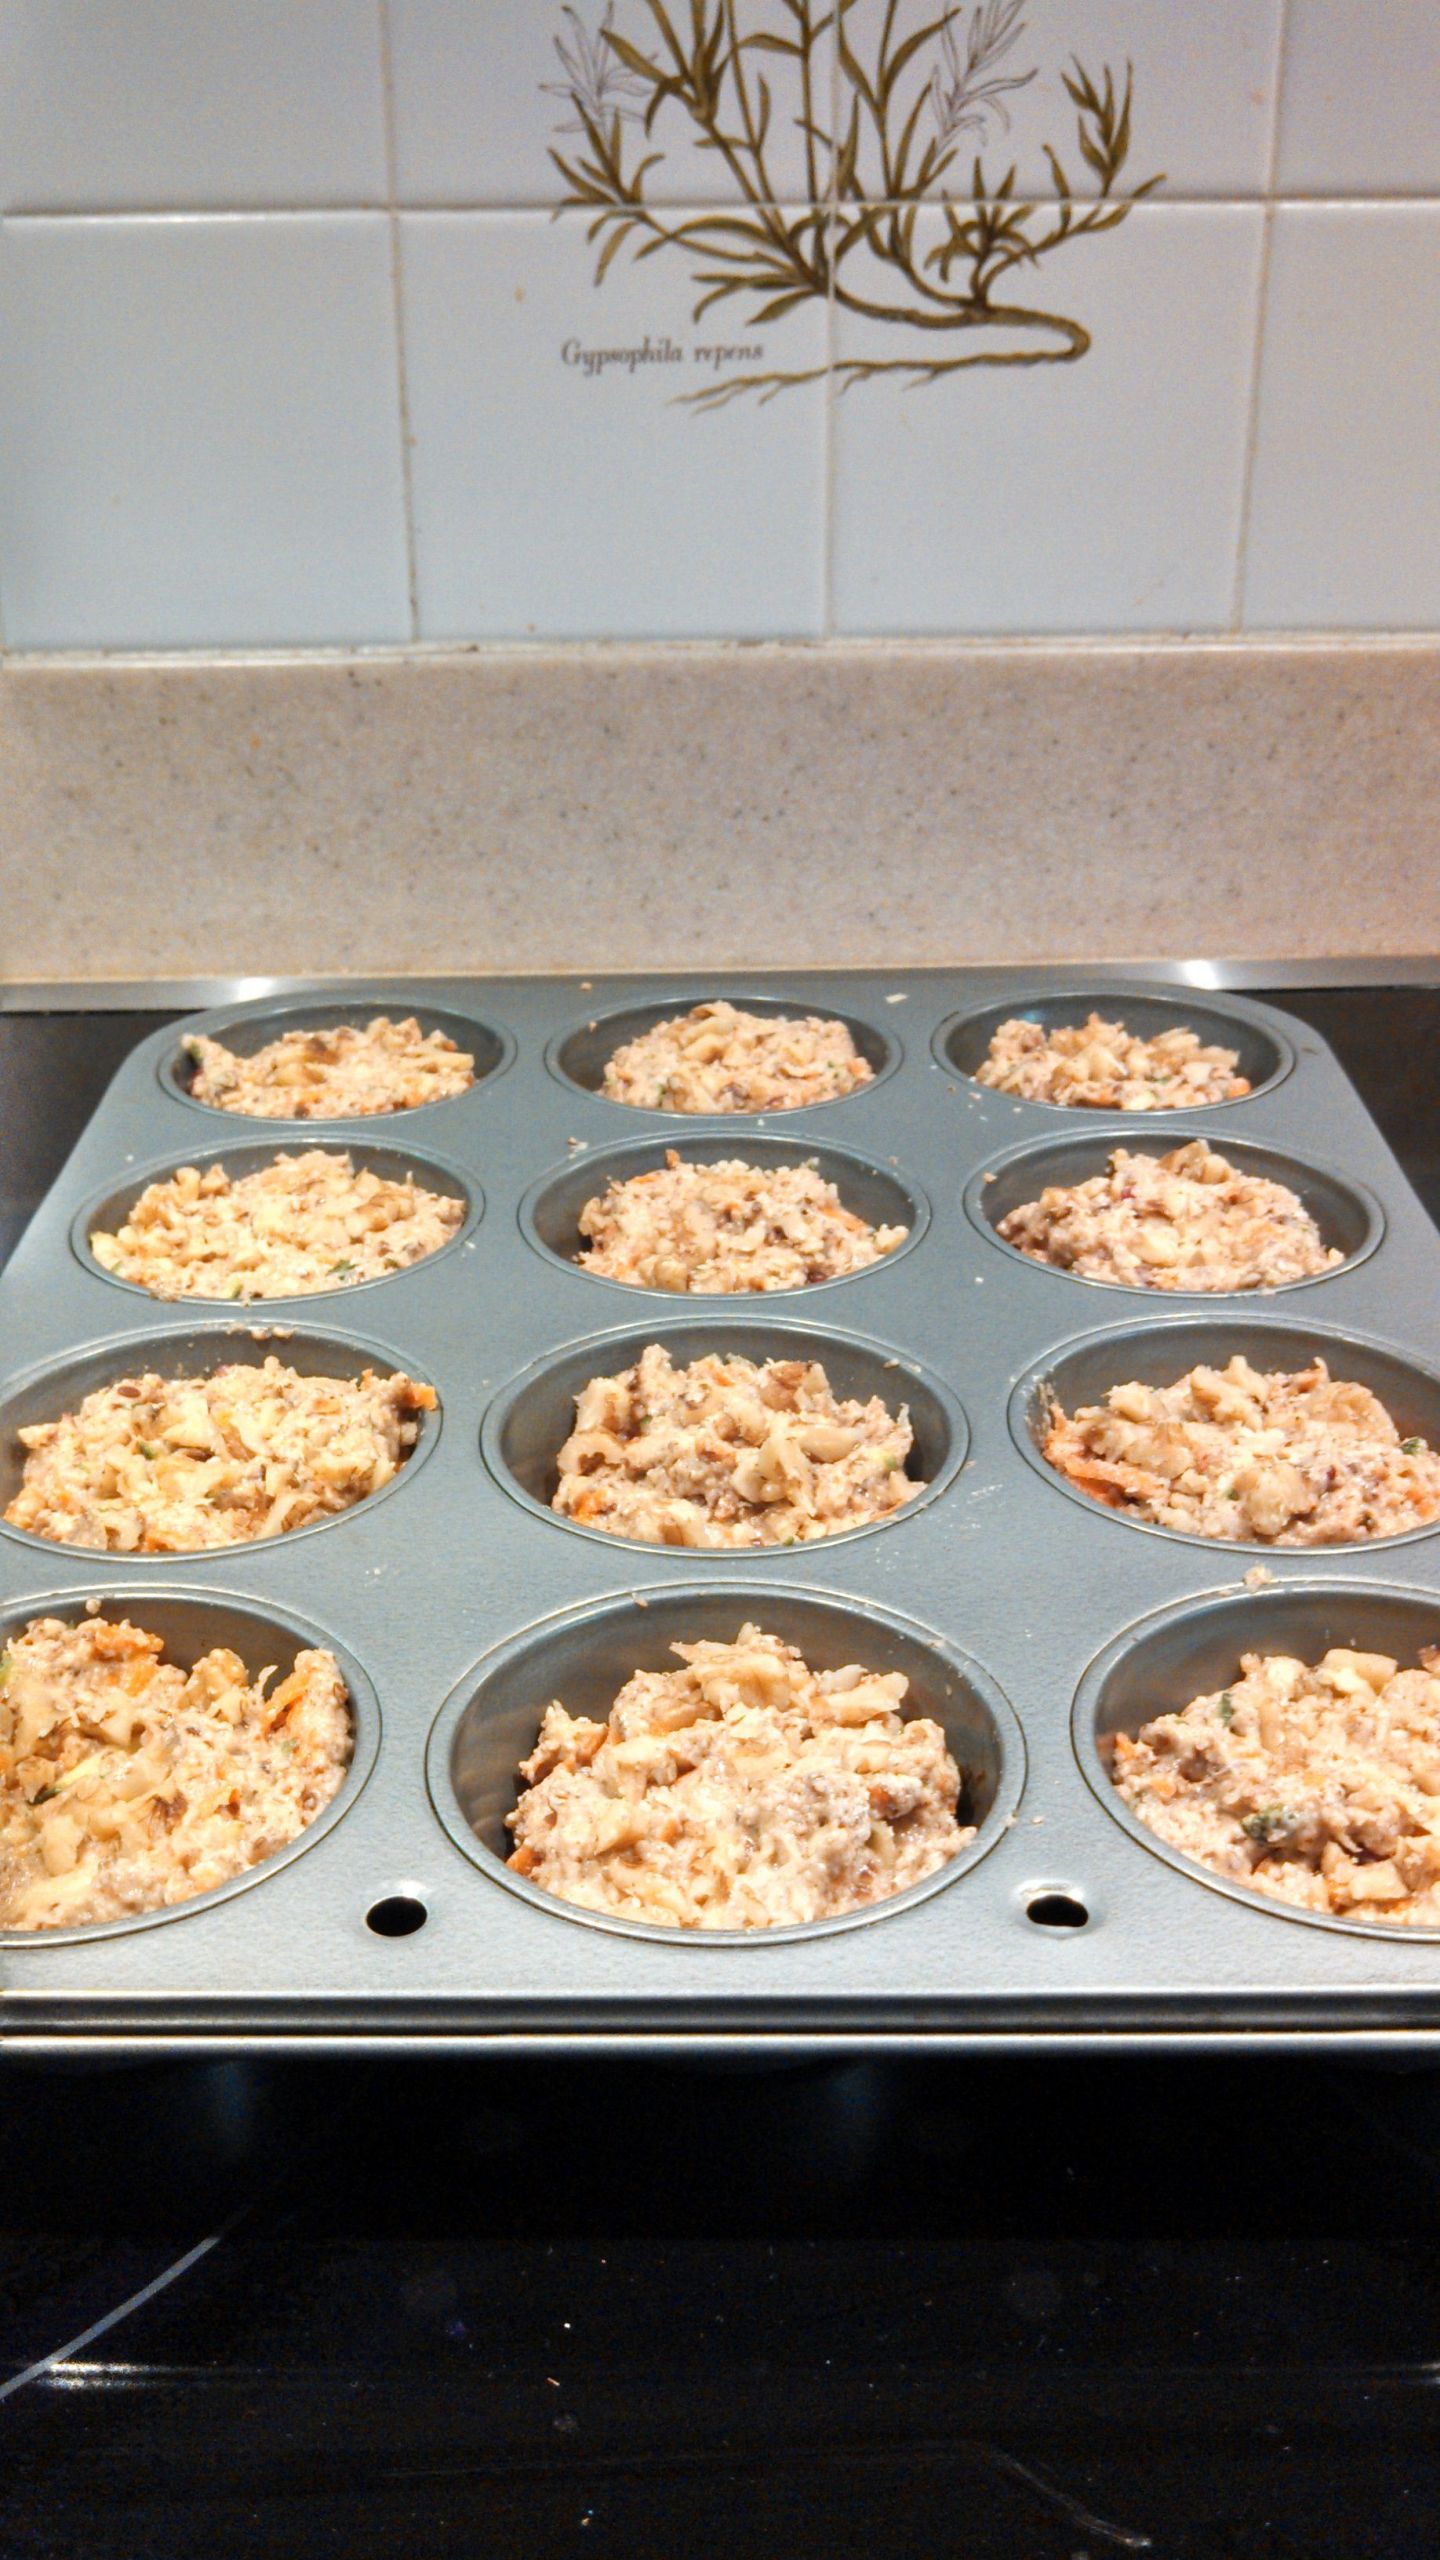 Esselstyn Recipes Plant Based Diet
 A 2 Z Muffins ready for the oven from Rip Esselstyn s new